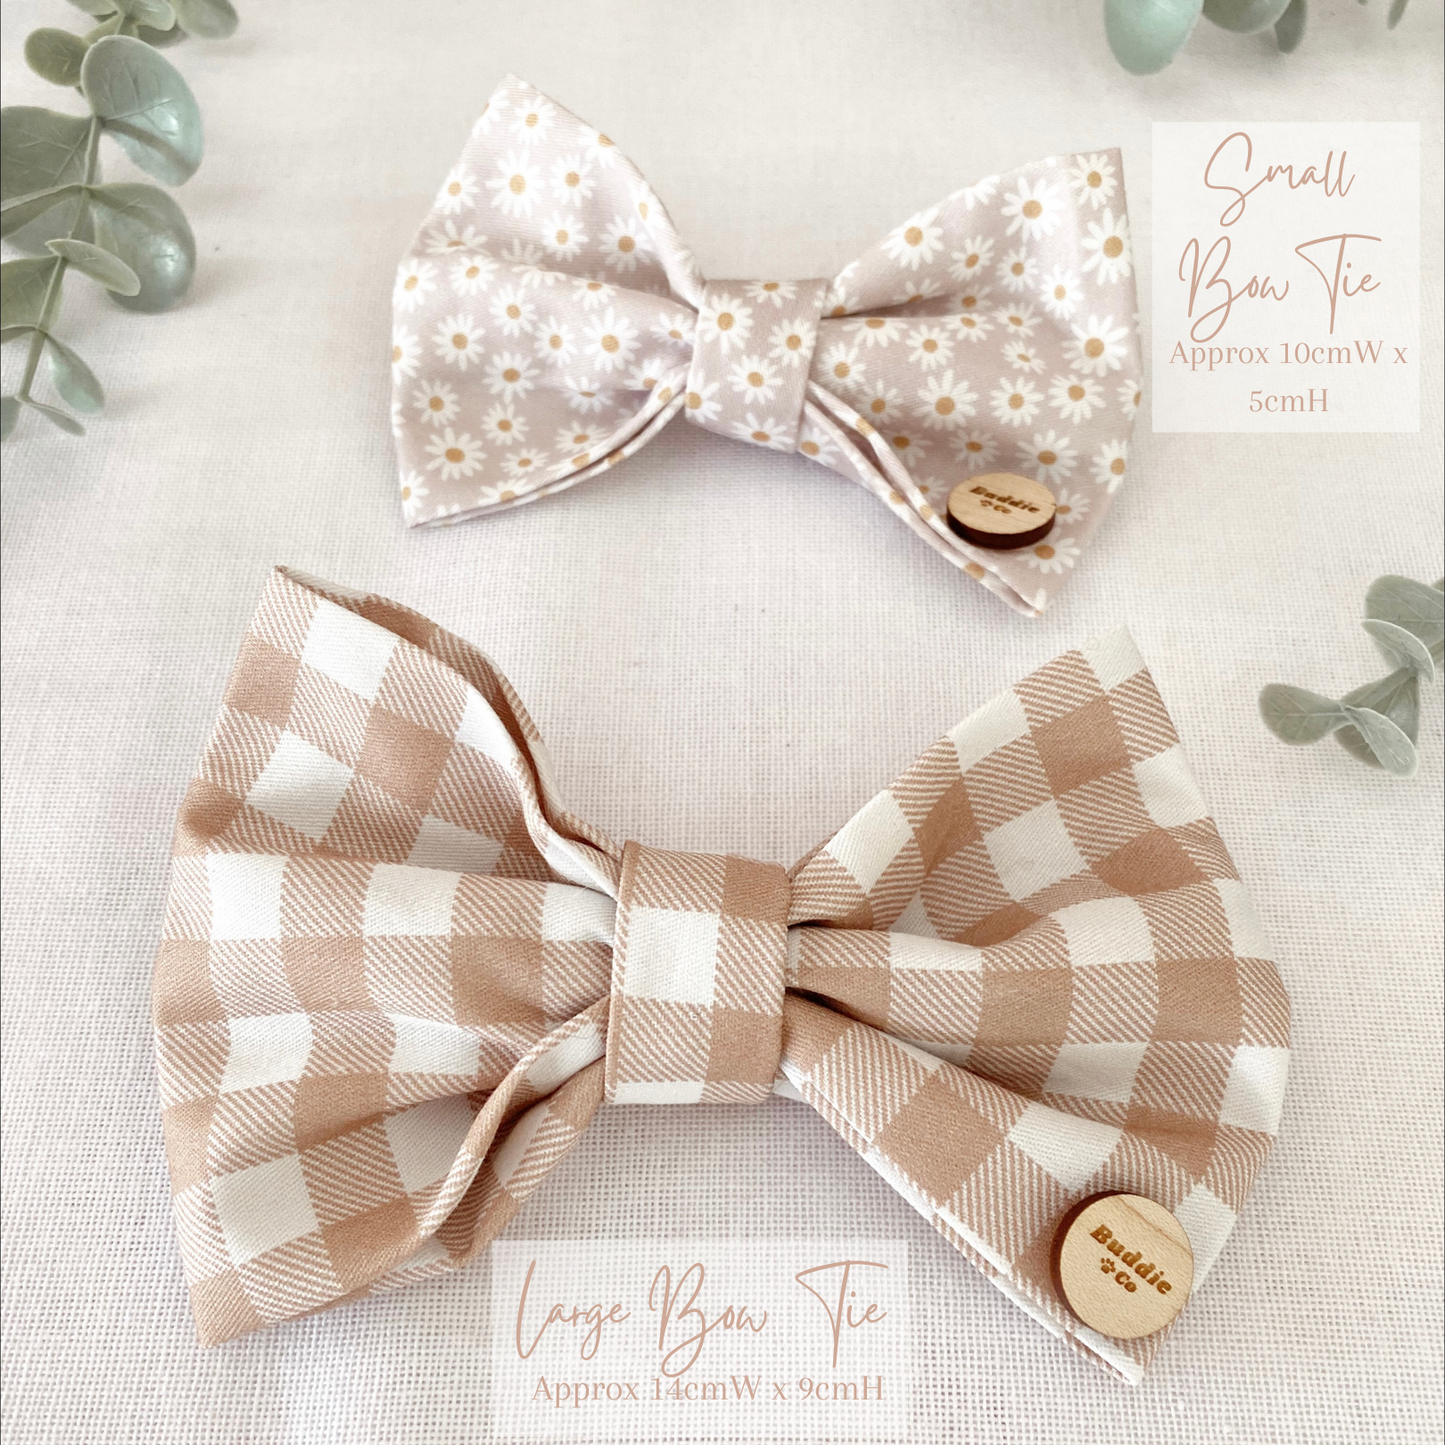 The 'Spot’ Bow Tie